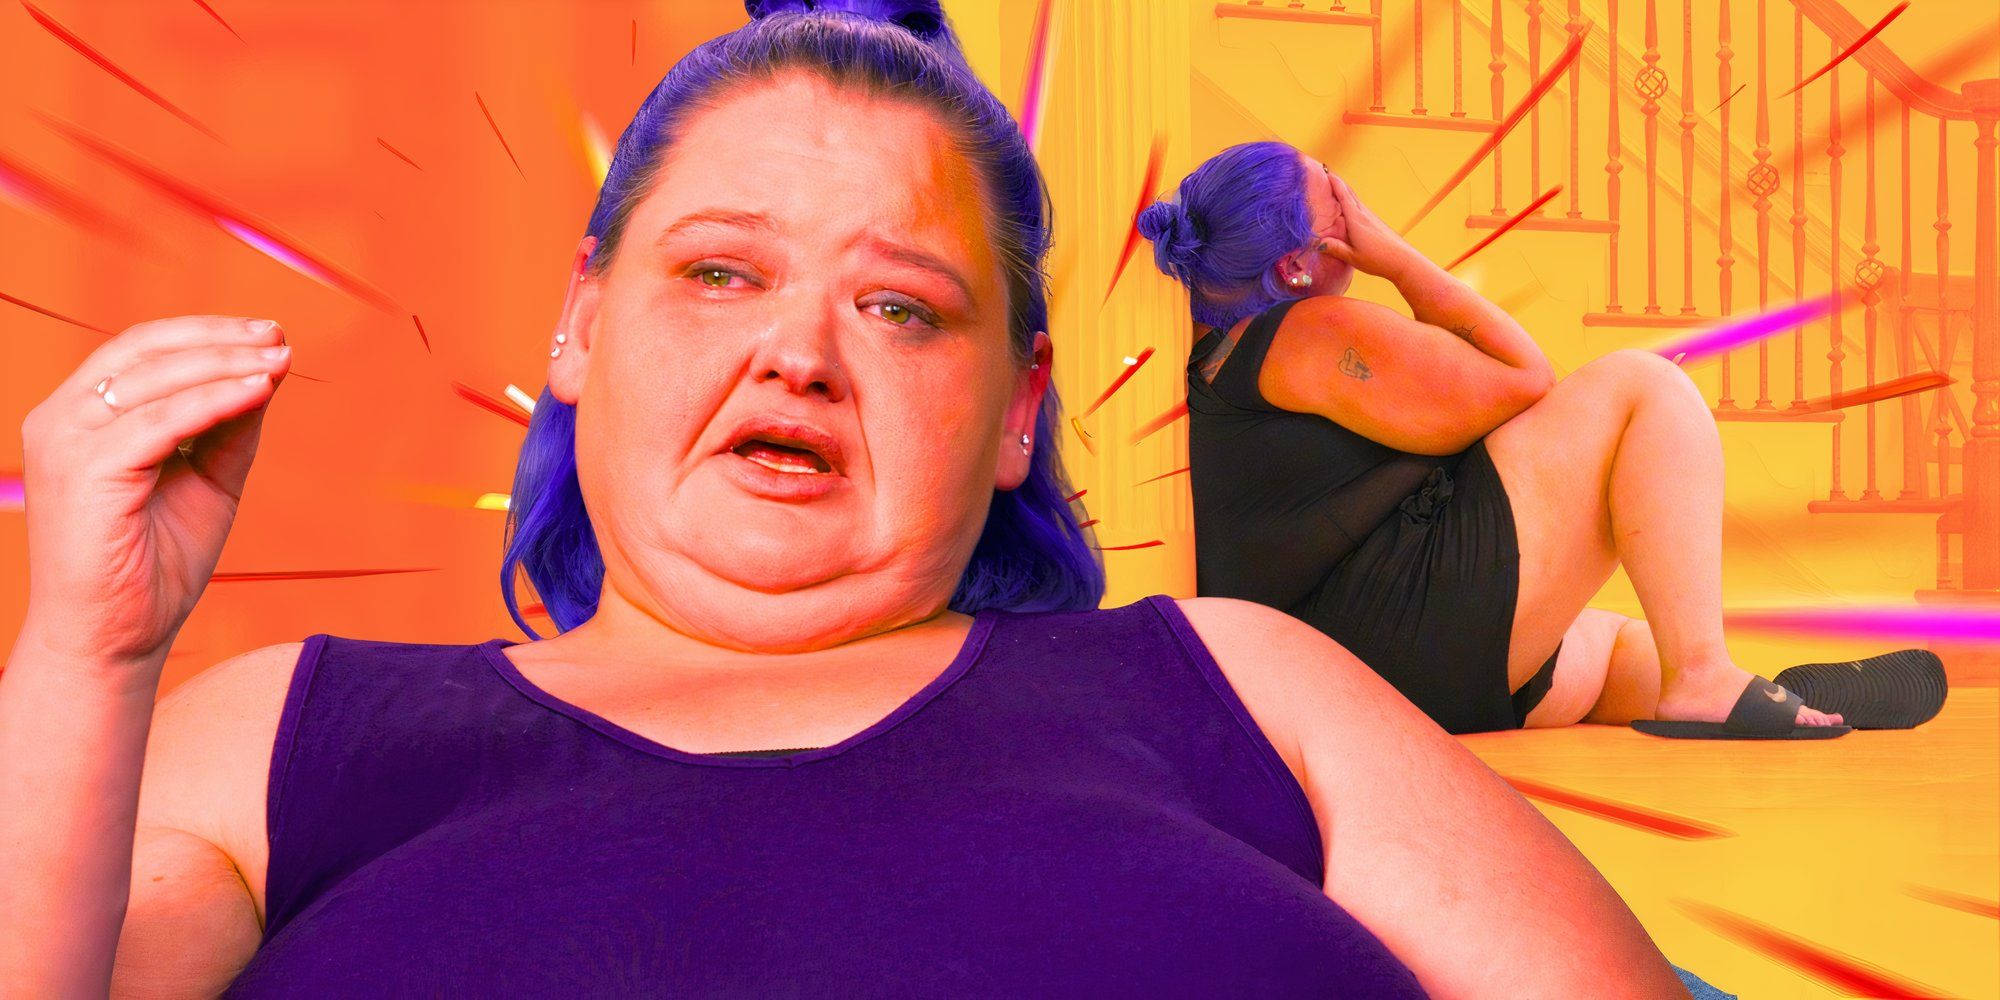 1000-Lb Sisters montage of Amy slaton with purple hair crying